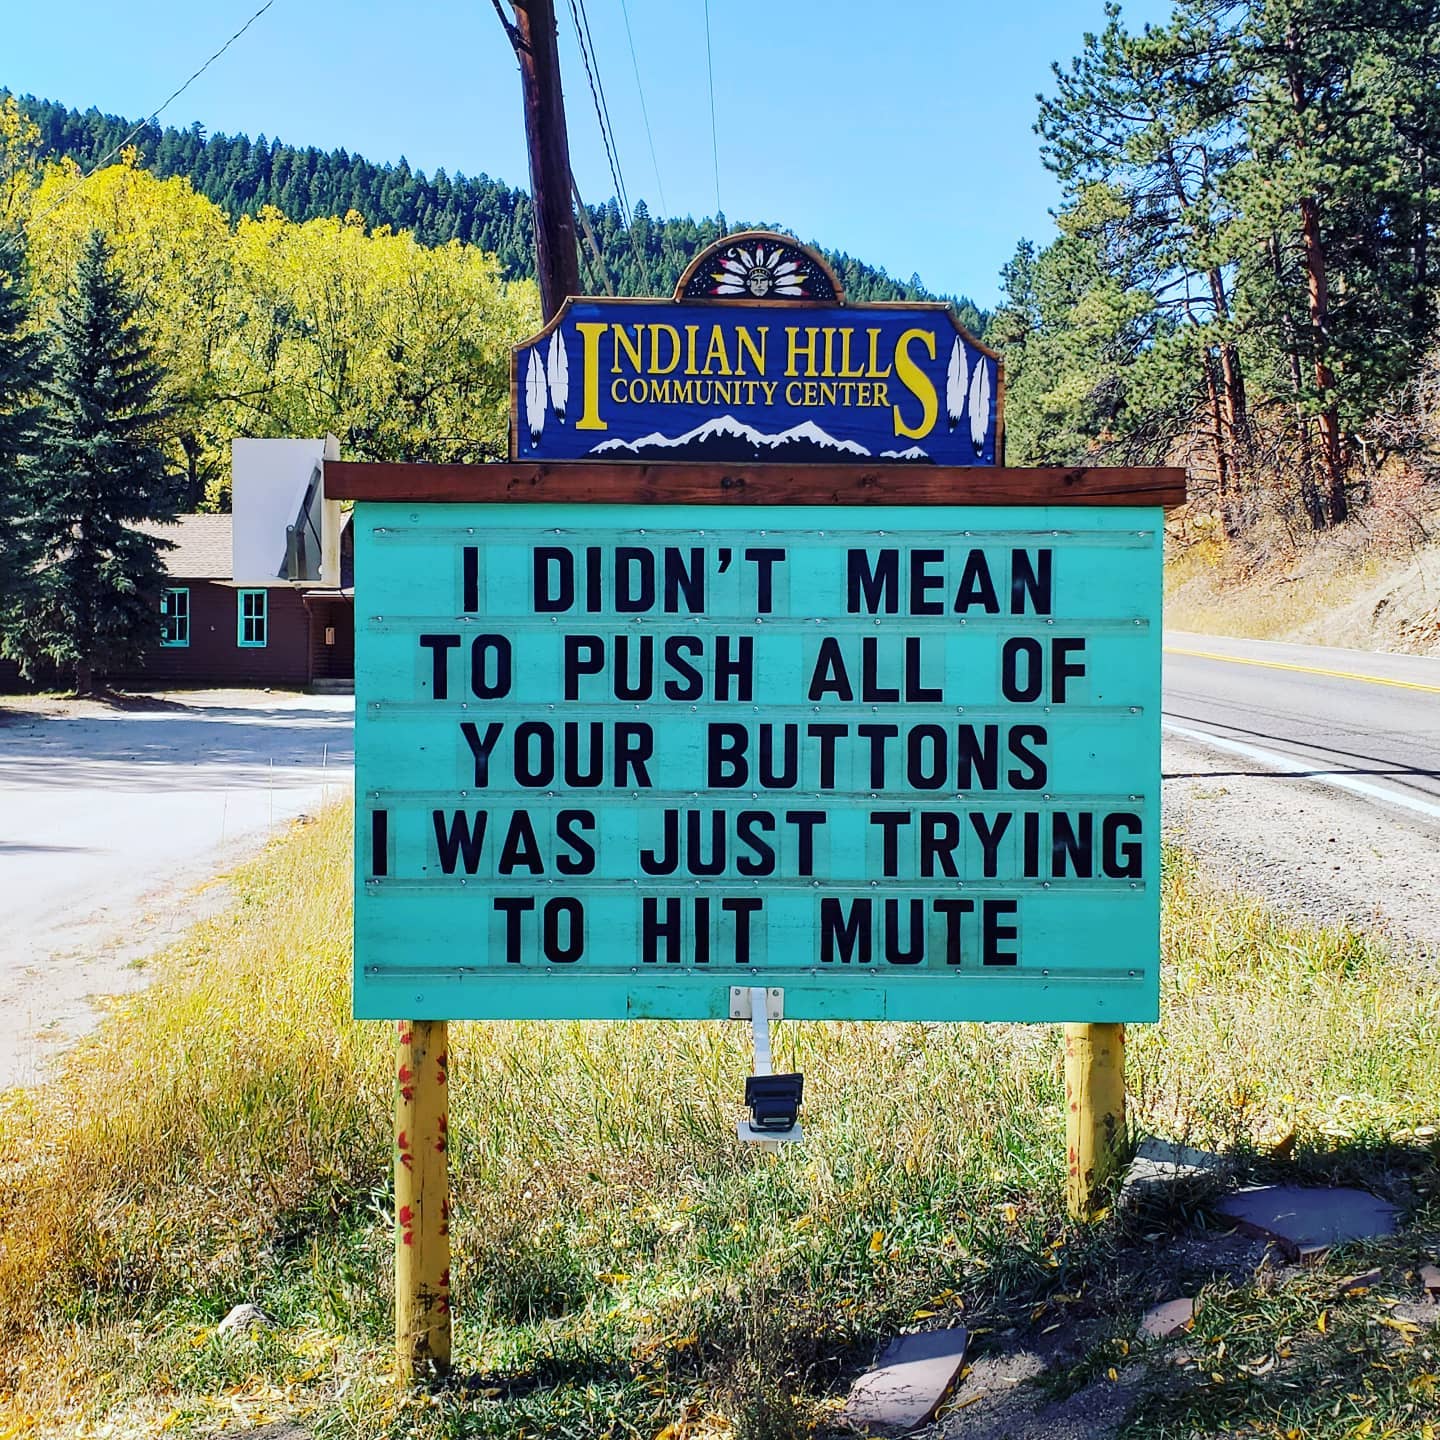 community sign that says: "I didn't mean to push all of your buttons I was just trying to hit mute."